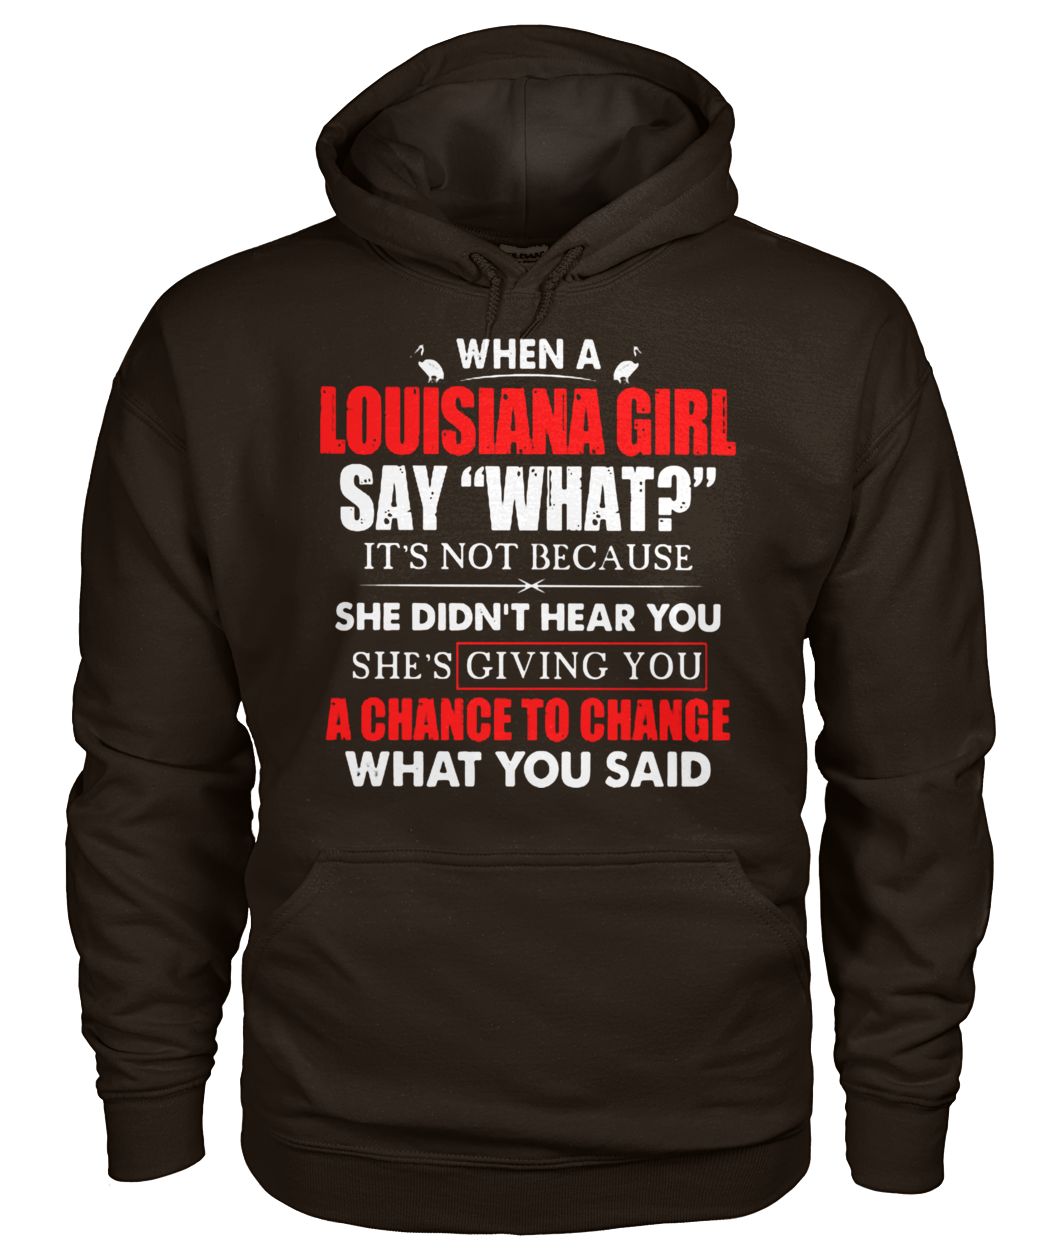 When a louisiana girl say what it's not because she didn't here you gildan hoodie